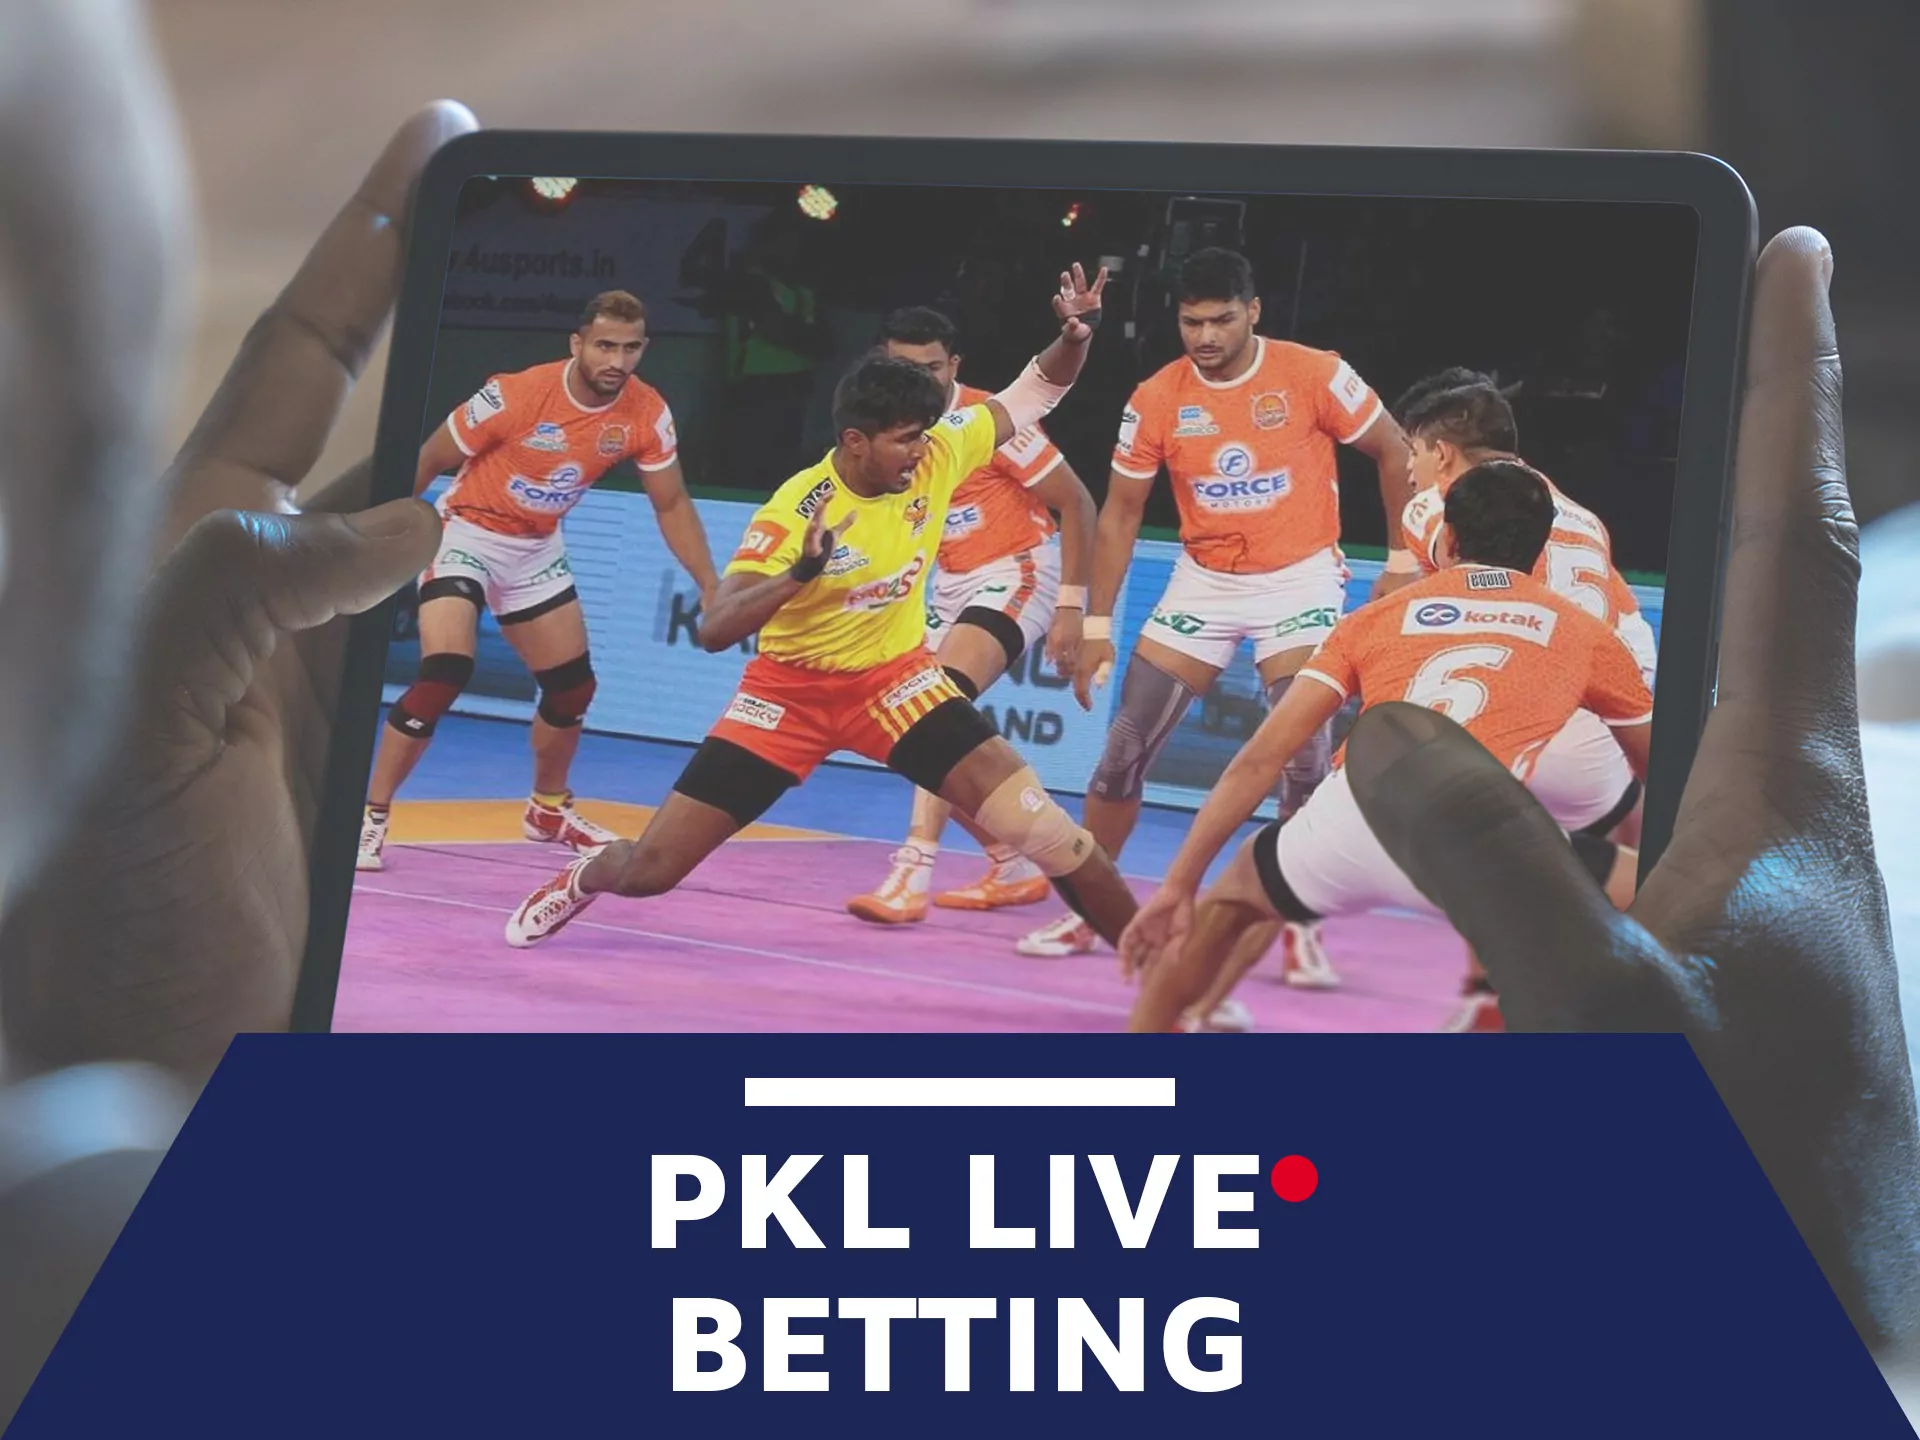 Bet in live format on Kabaddi matches.